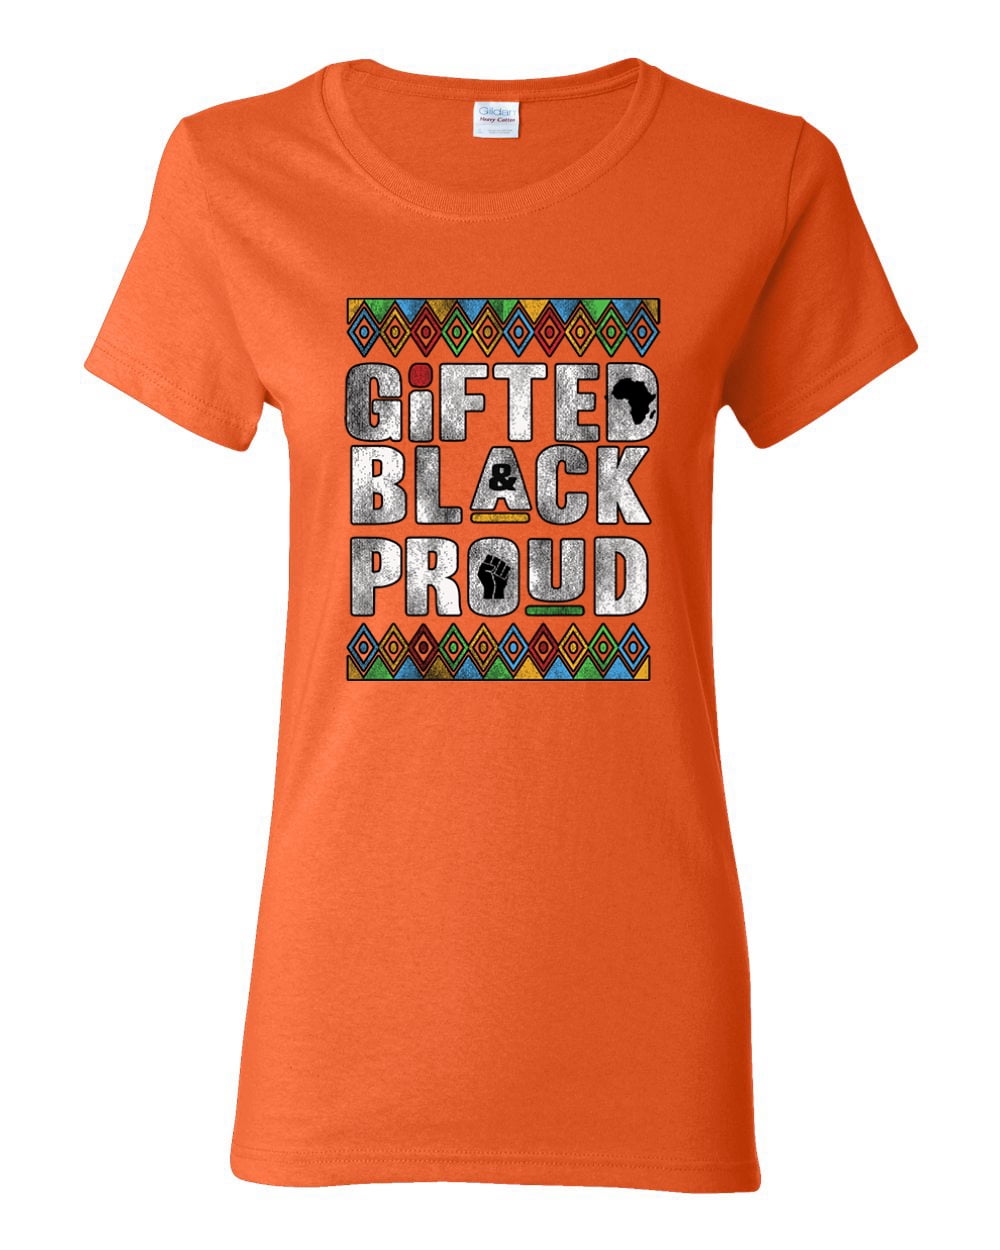 Black Pride Rights Supporter Young Gifted And Black Proud Black History Month Gift Shirt Melanin Black Power Tee For African American